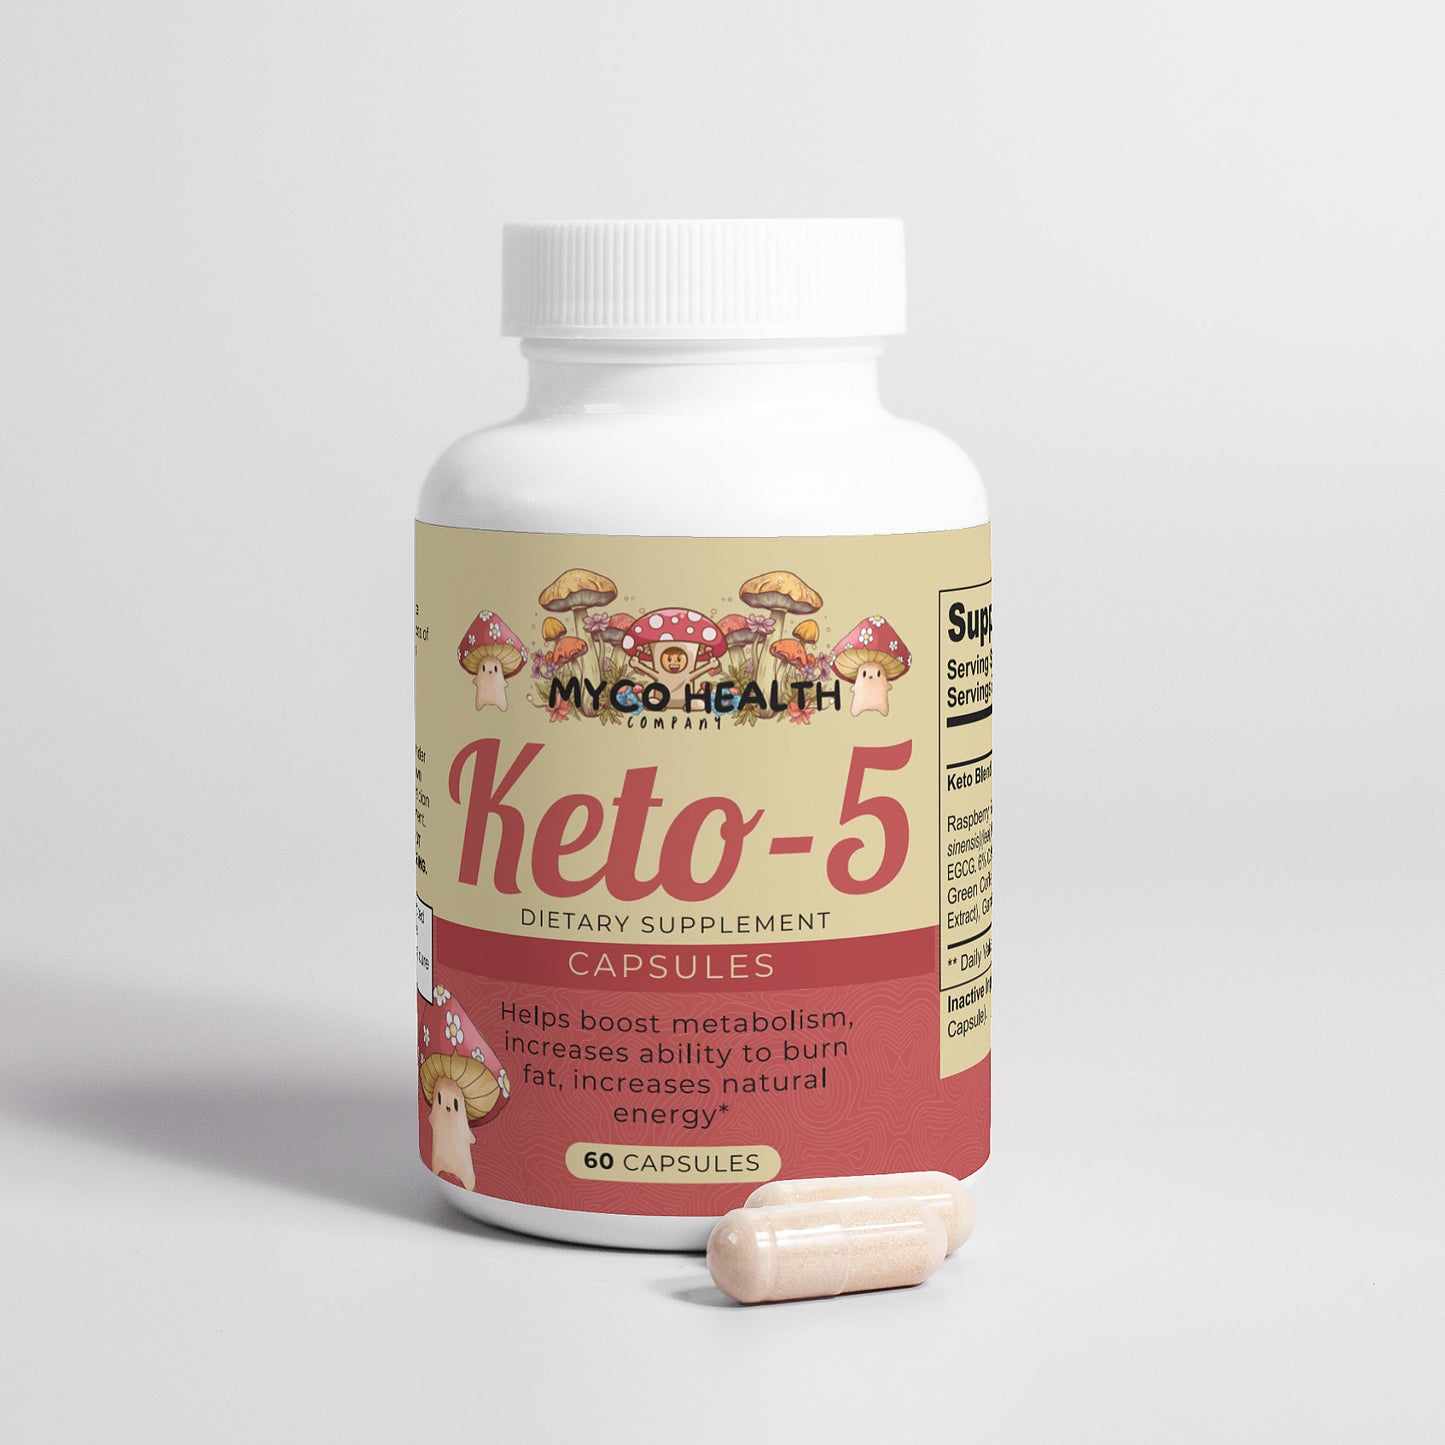 Experience Effective Fat Burning with Keto-5 Supplement